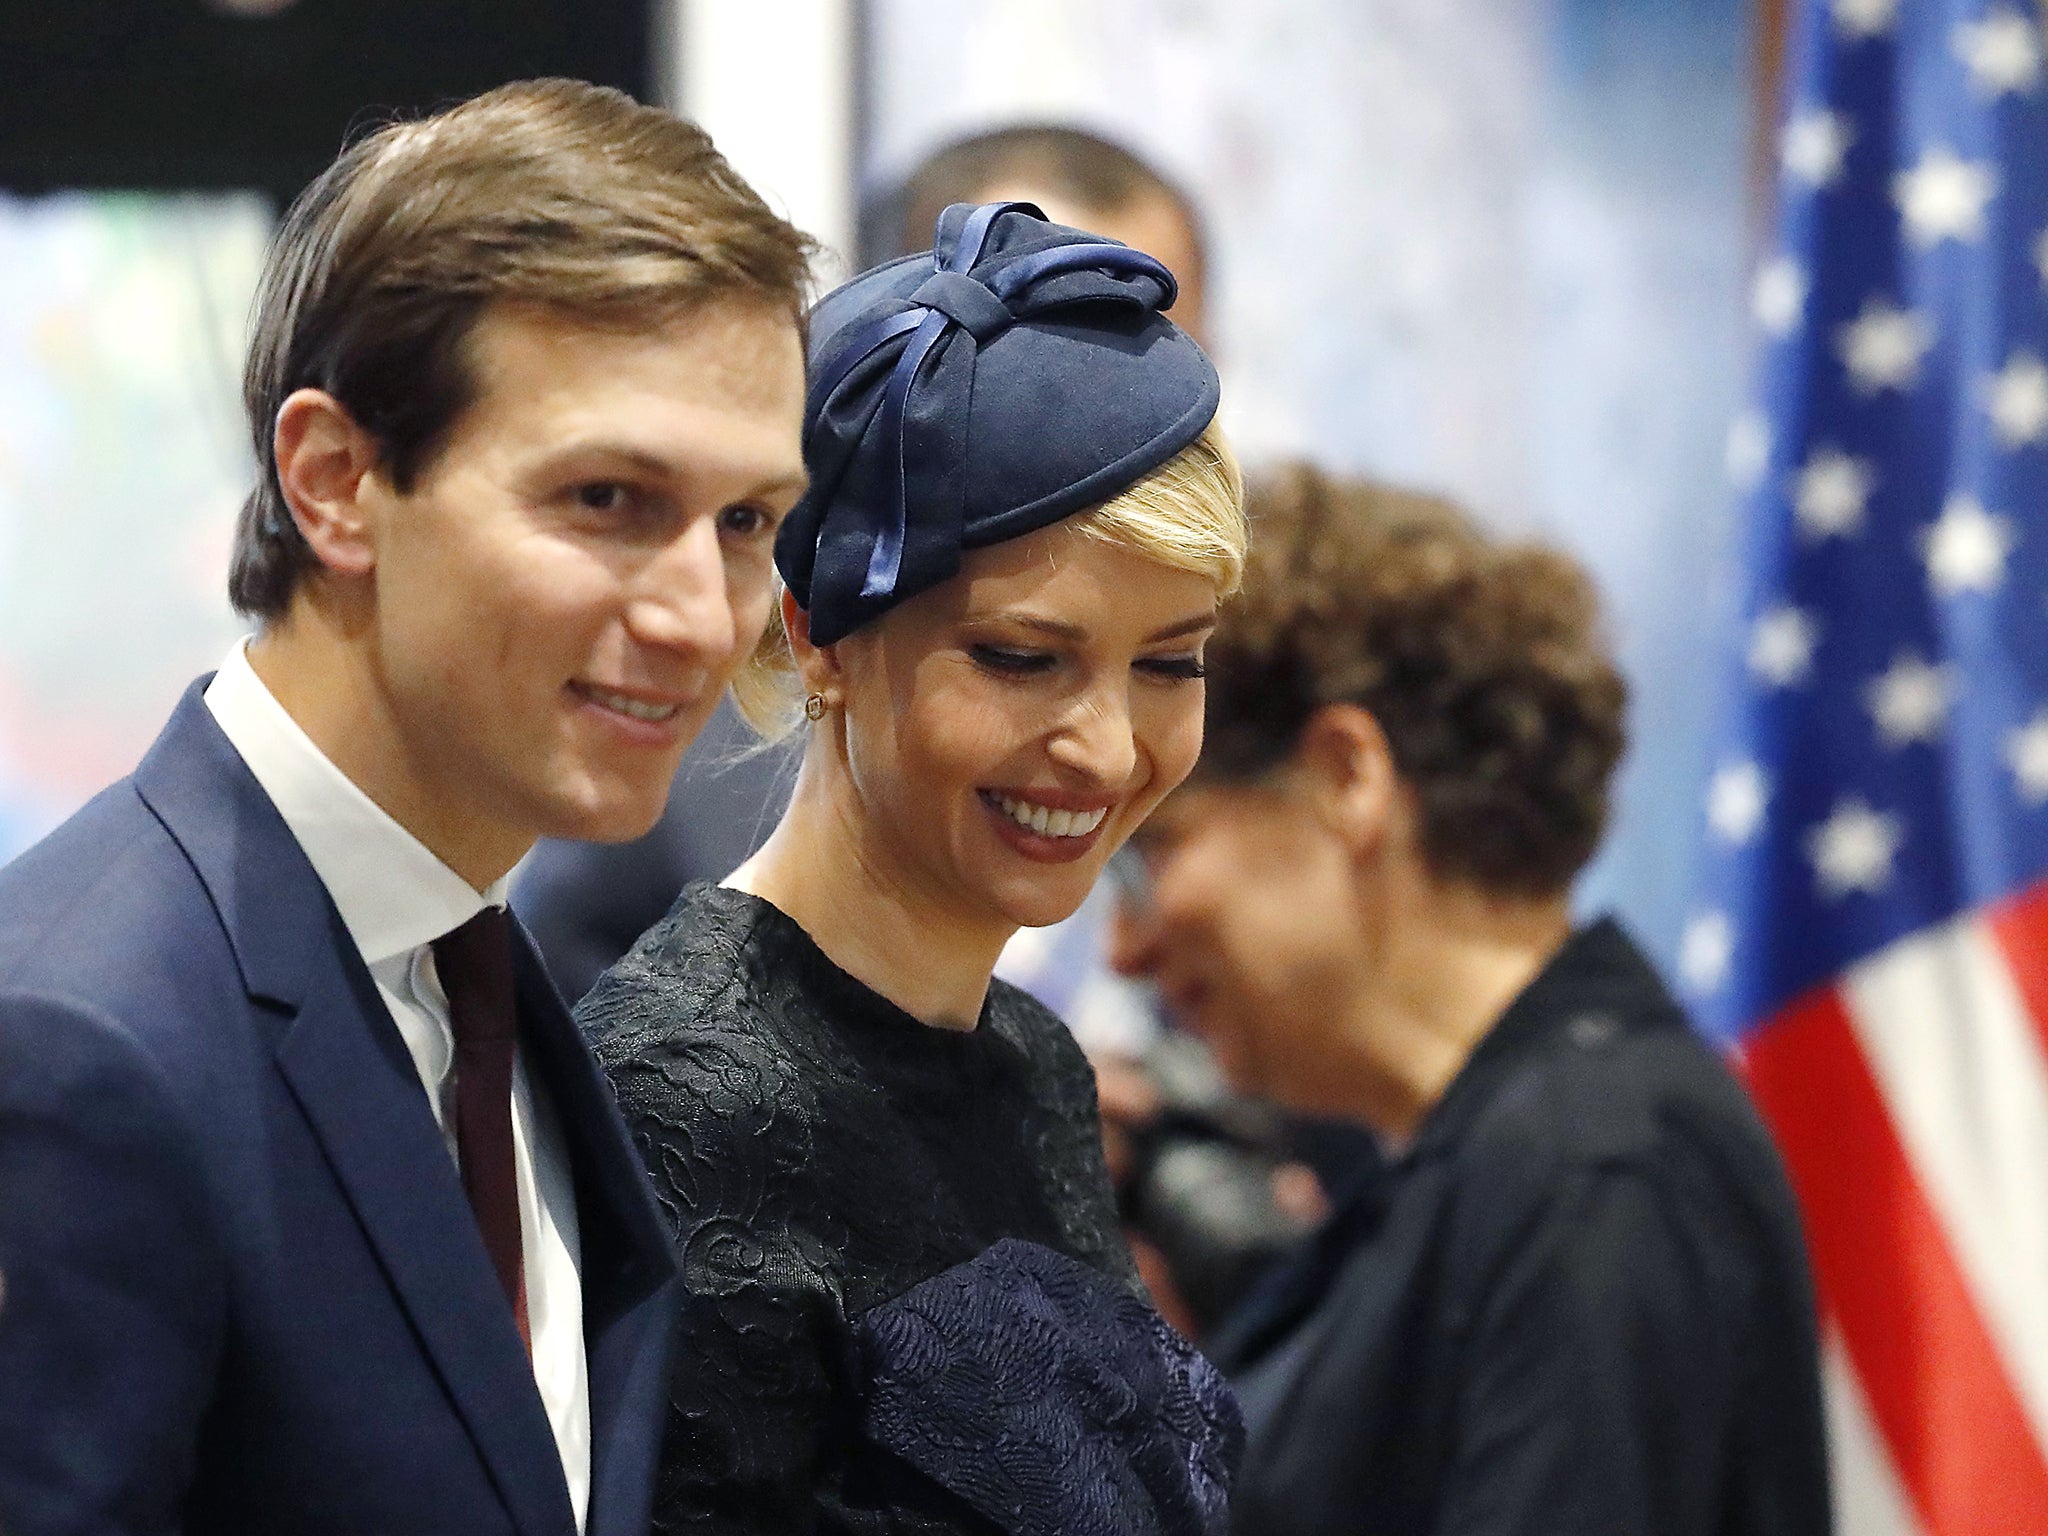 Trump&apos;s son-in-law Jared Kushner &apos;now a focus in Russia investigation&apos;